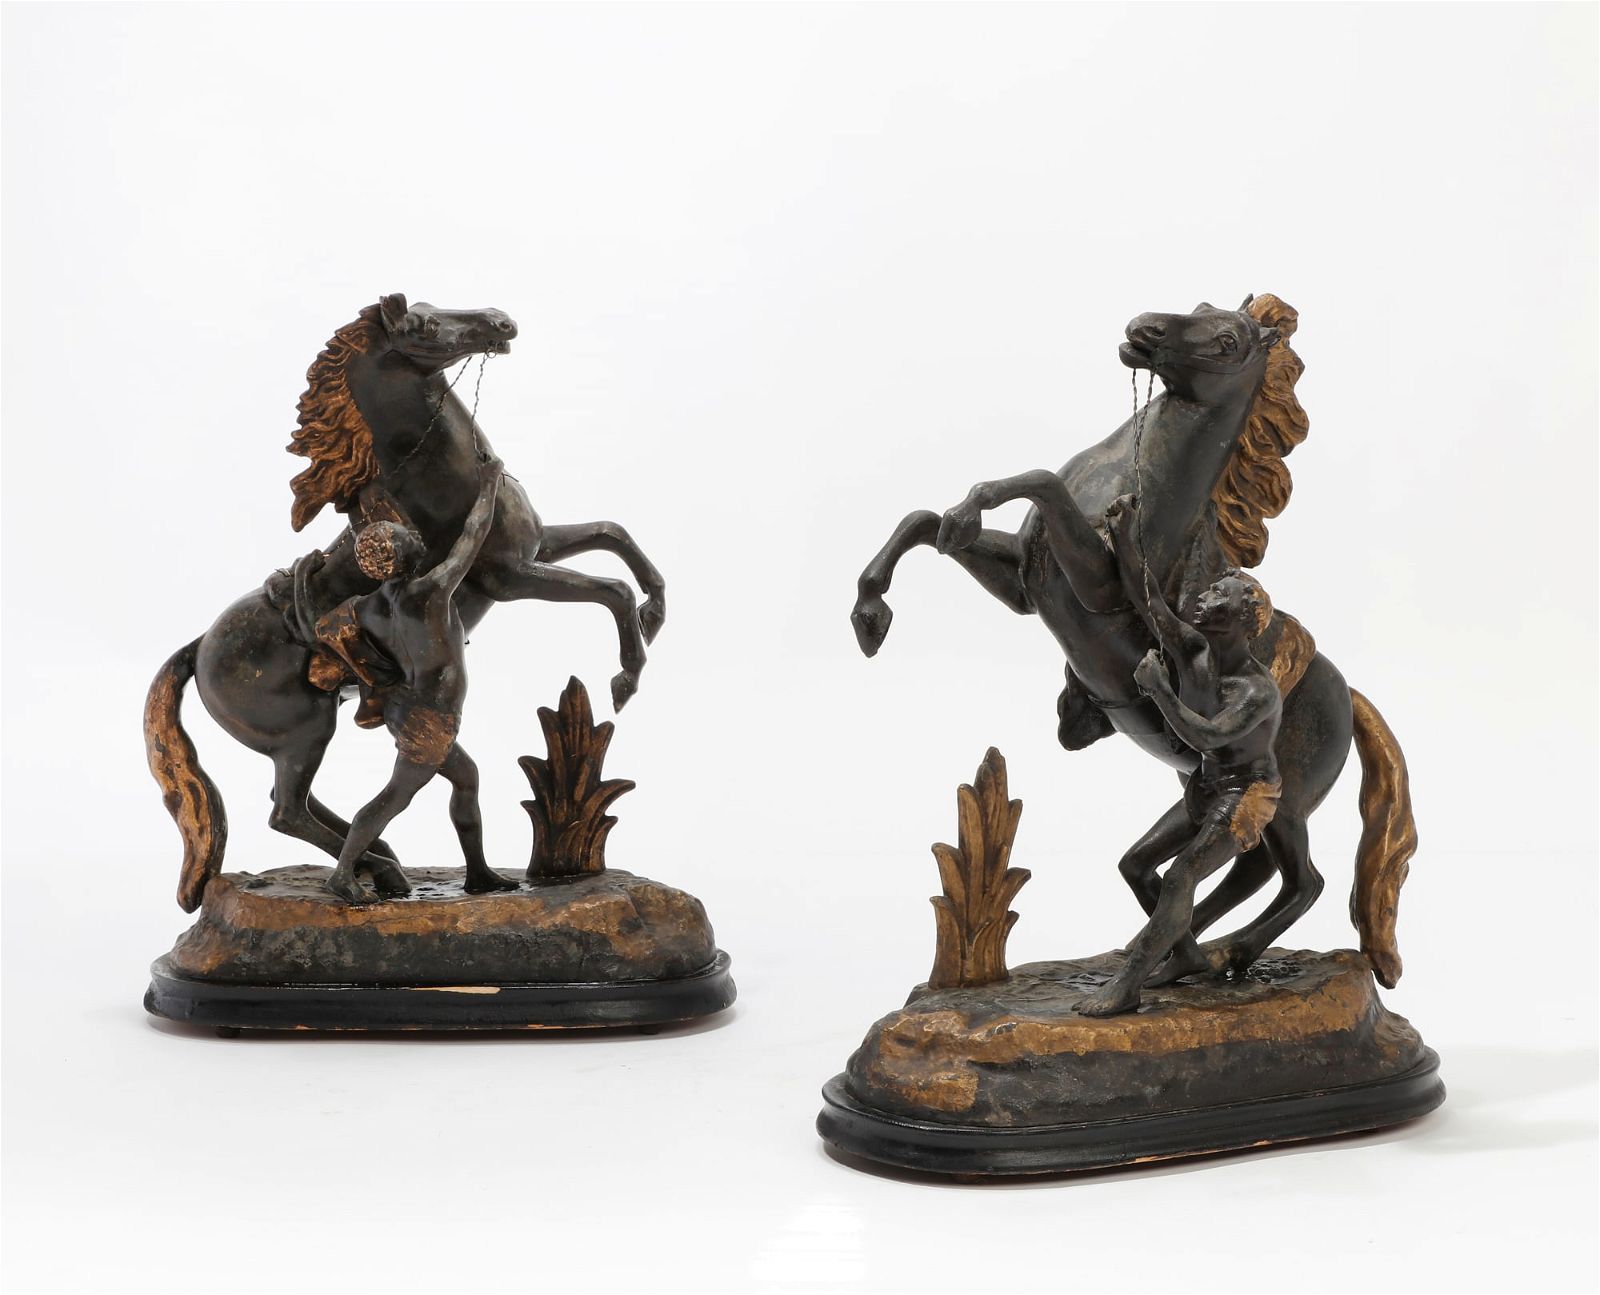 TWO METAL MODELS OF THE MARLEY HORSESTwo